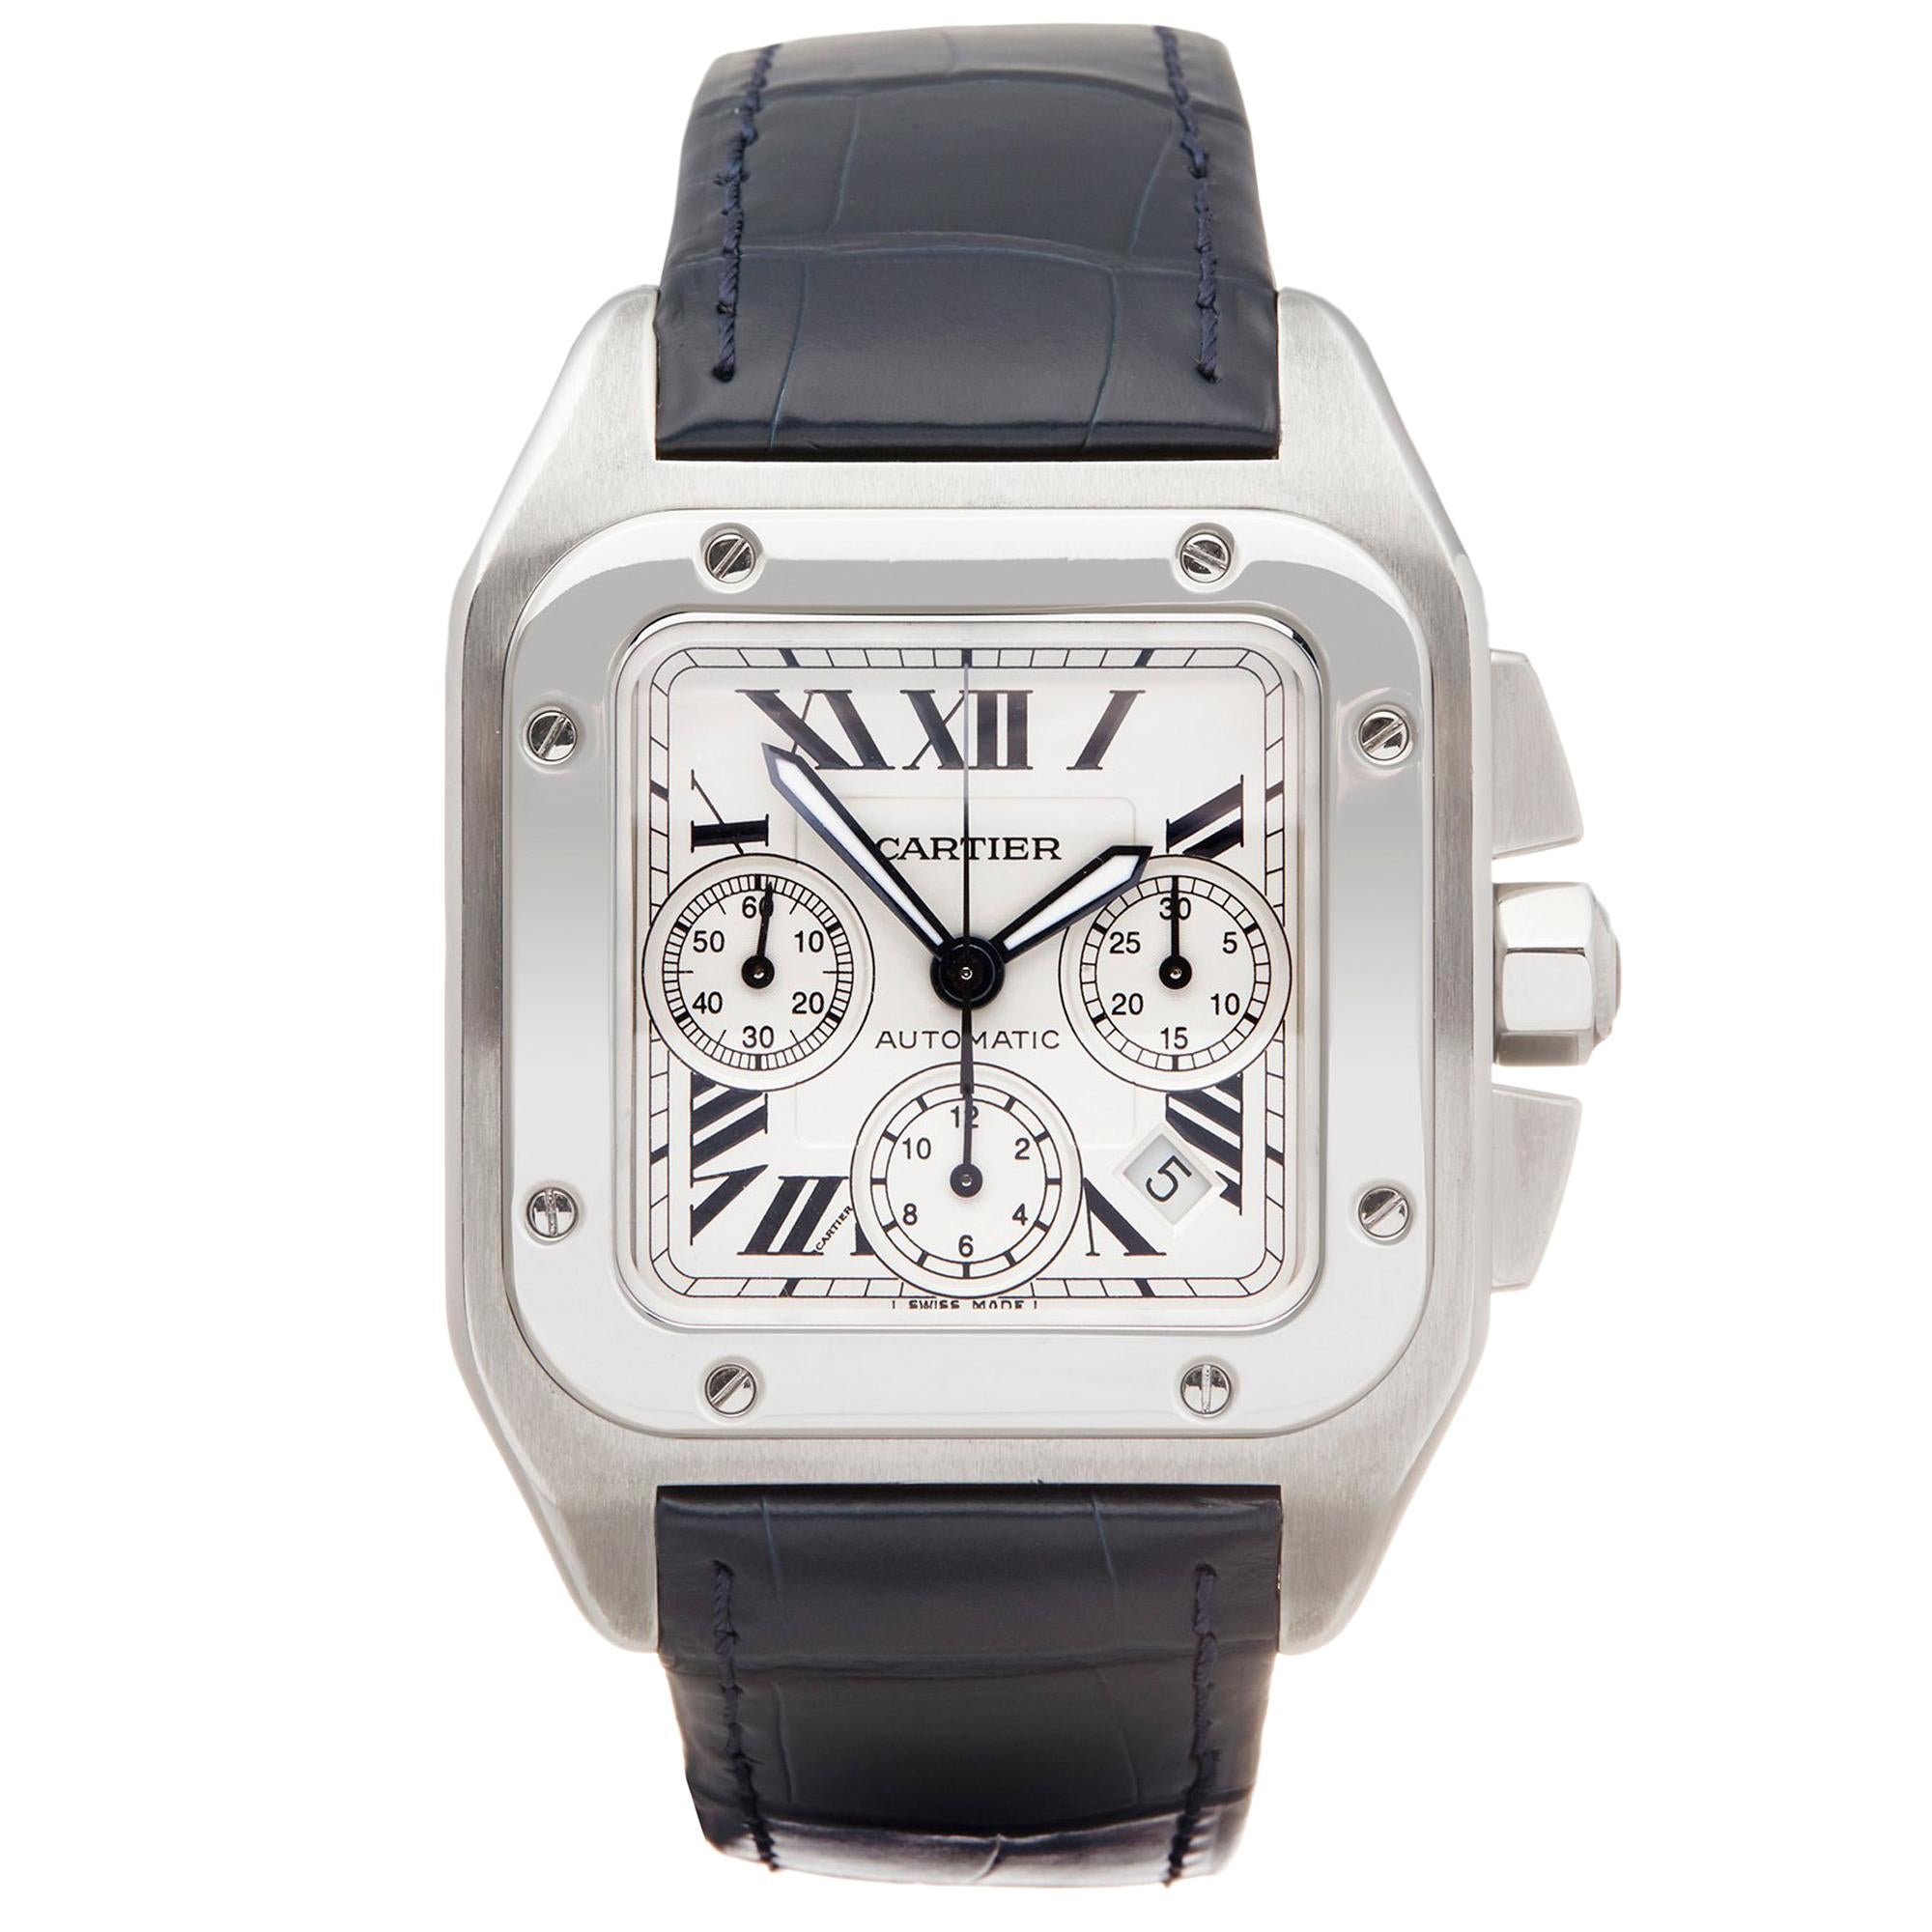 Cartier Santos 100 XL Chronograph Stainless Steel 2740 or W20090X8